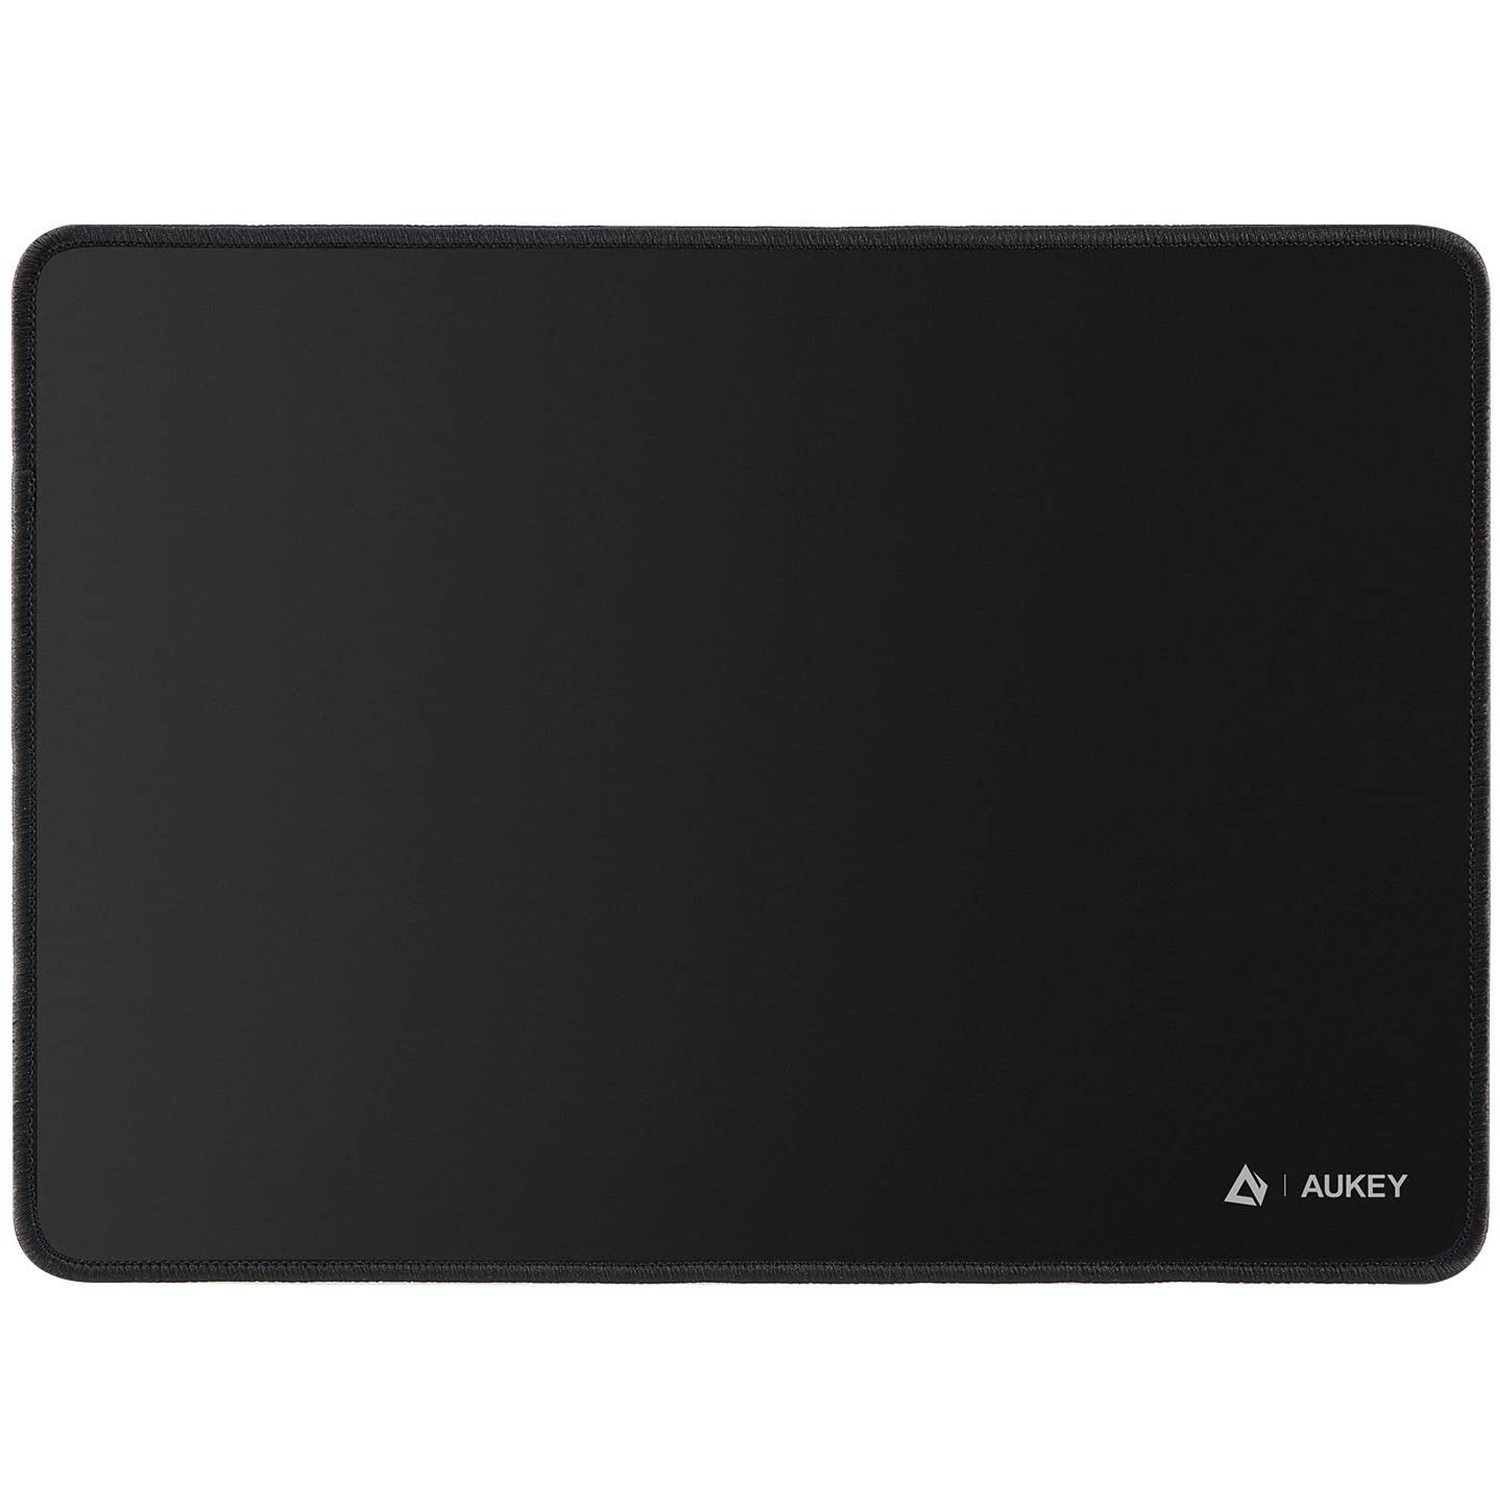 AUKEY Mouse Pad, Gaming Mouse Mat MediumSize (350 by 250mm) with Smooth Surface, NonSlip